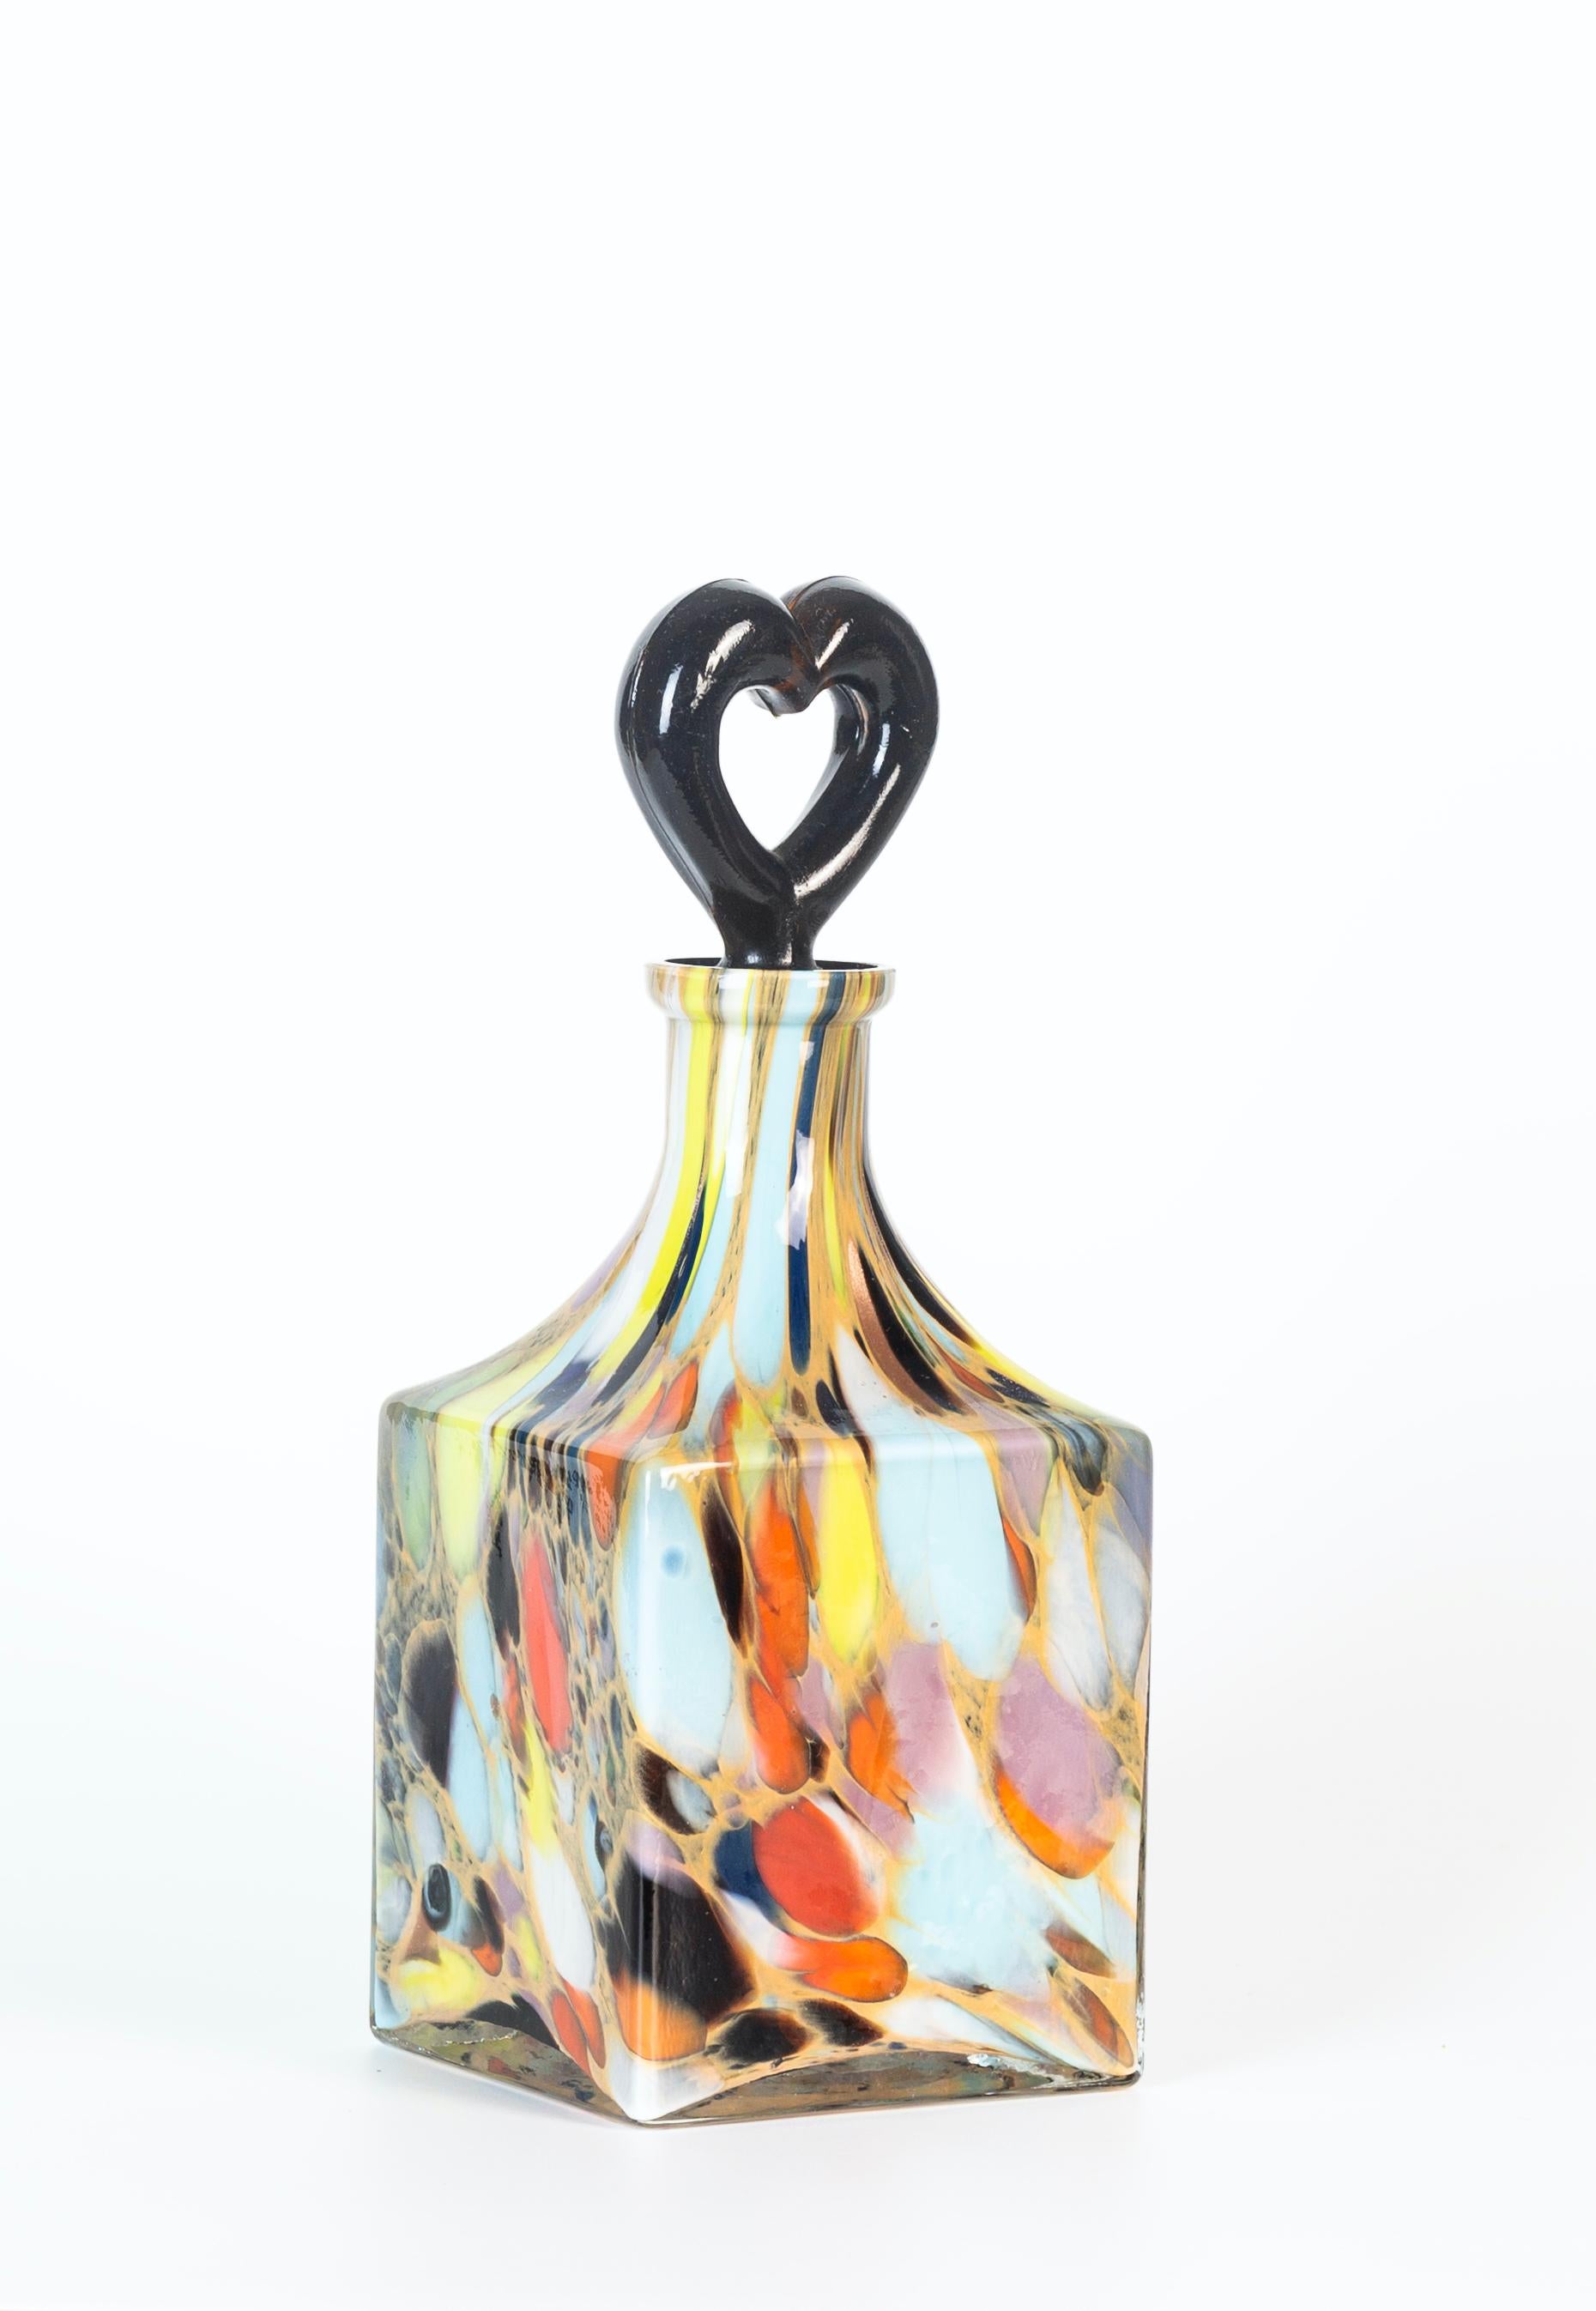 Murano colored bottle is a wonderful glass decorative object, realized during the 1970s.

Very beautiful mixed colored Murano bottle with heart shaped stopper.

Very good condition.